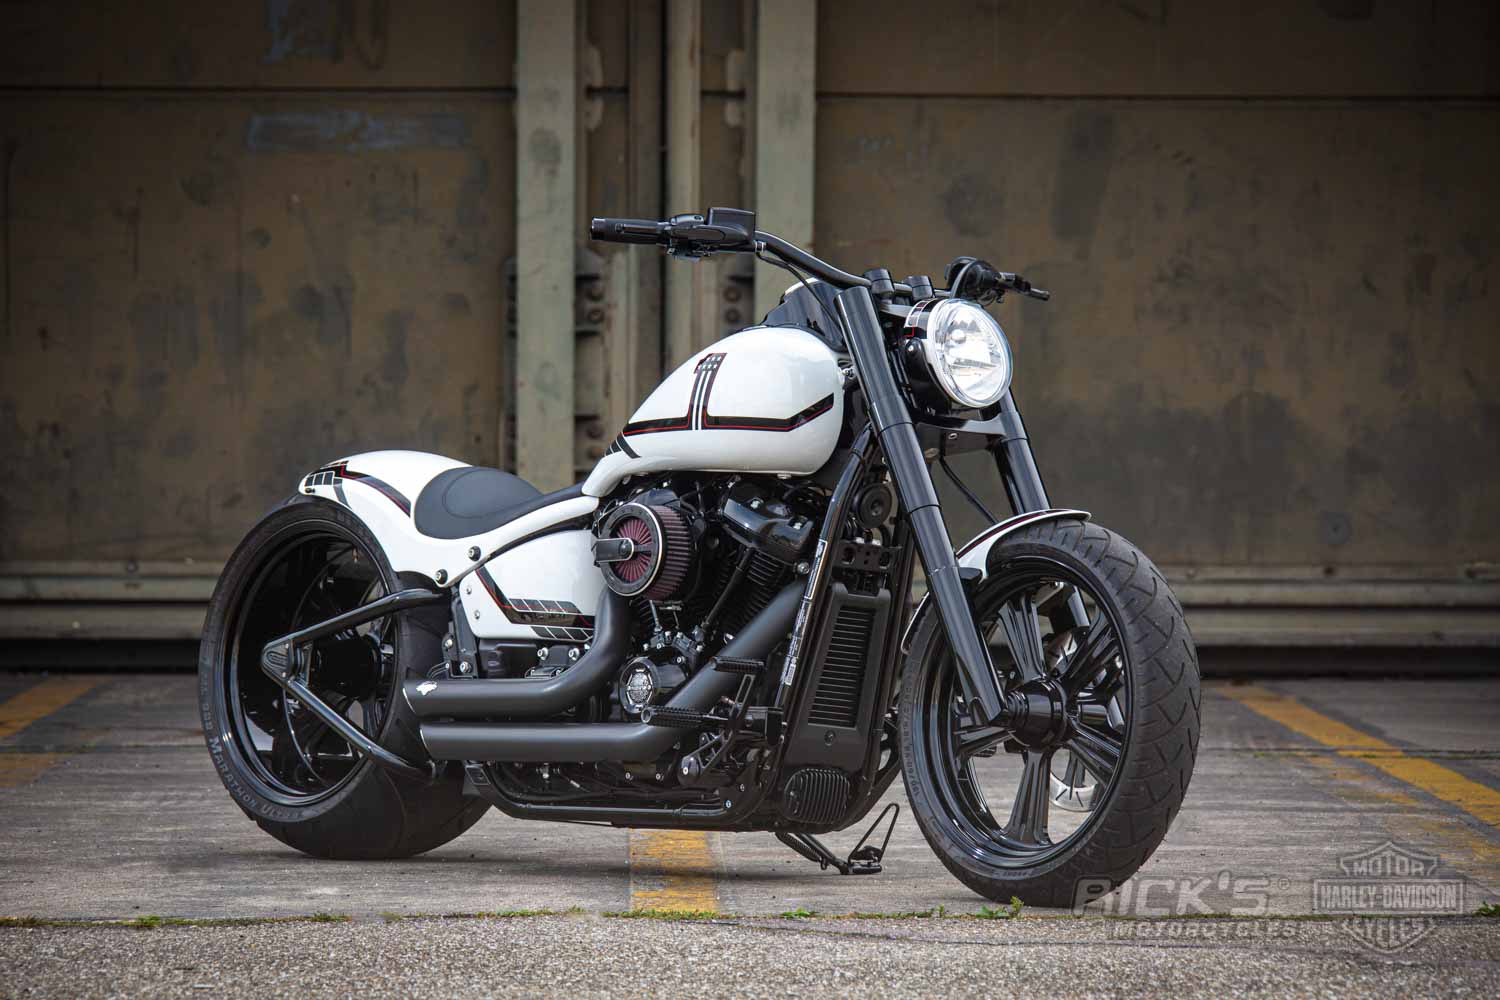 The One And Only Rick S Motorcycles Harley Davidson Baden Baden